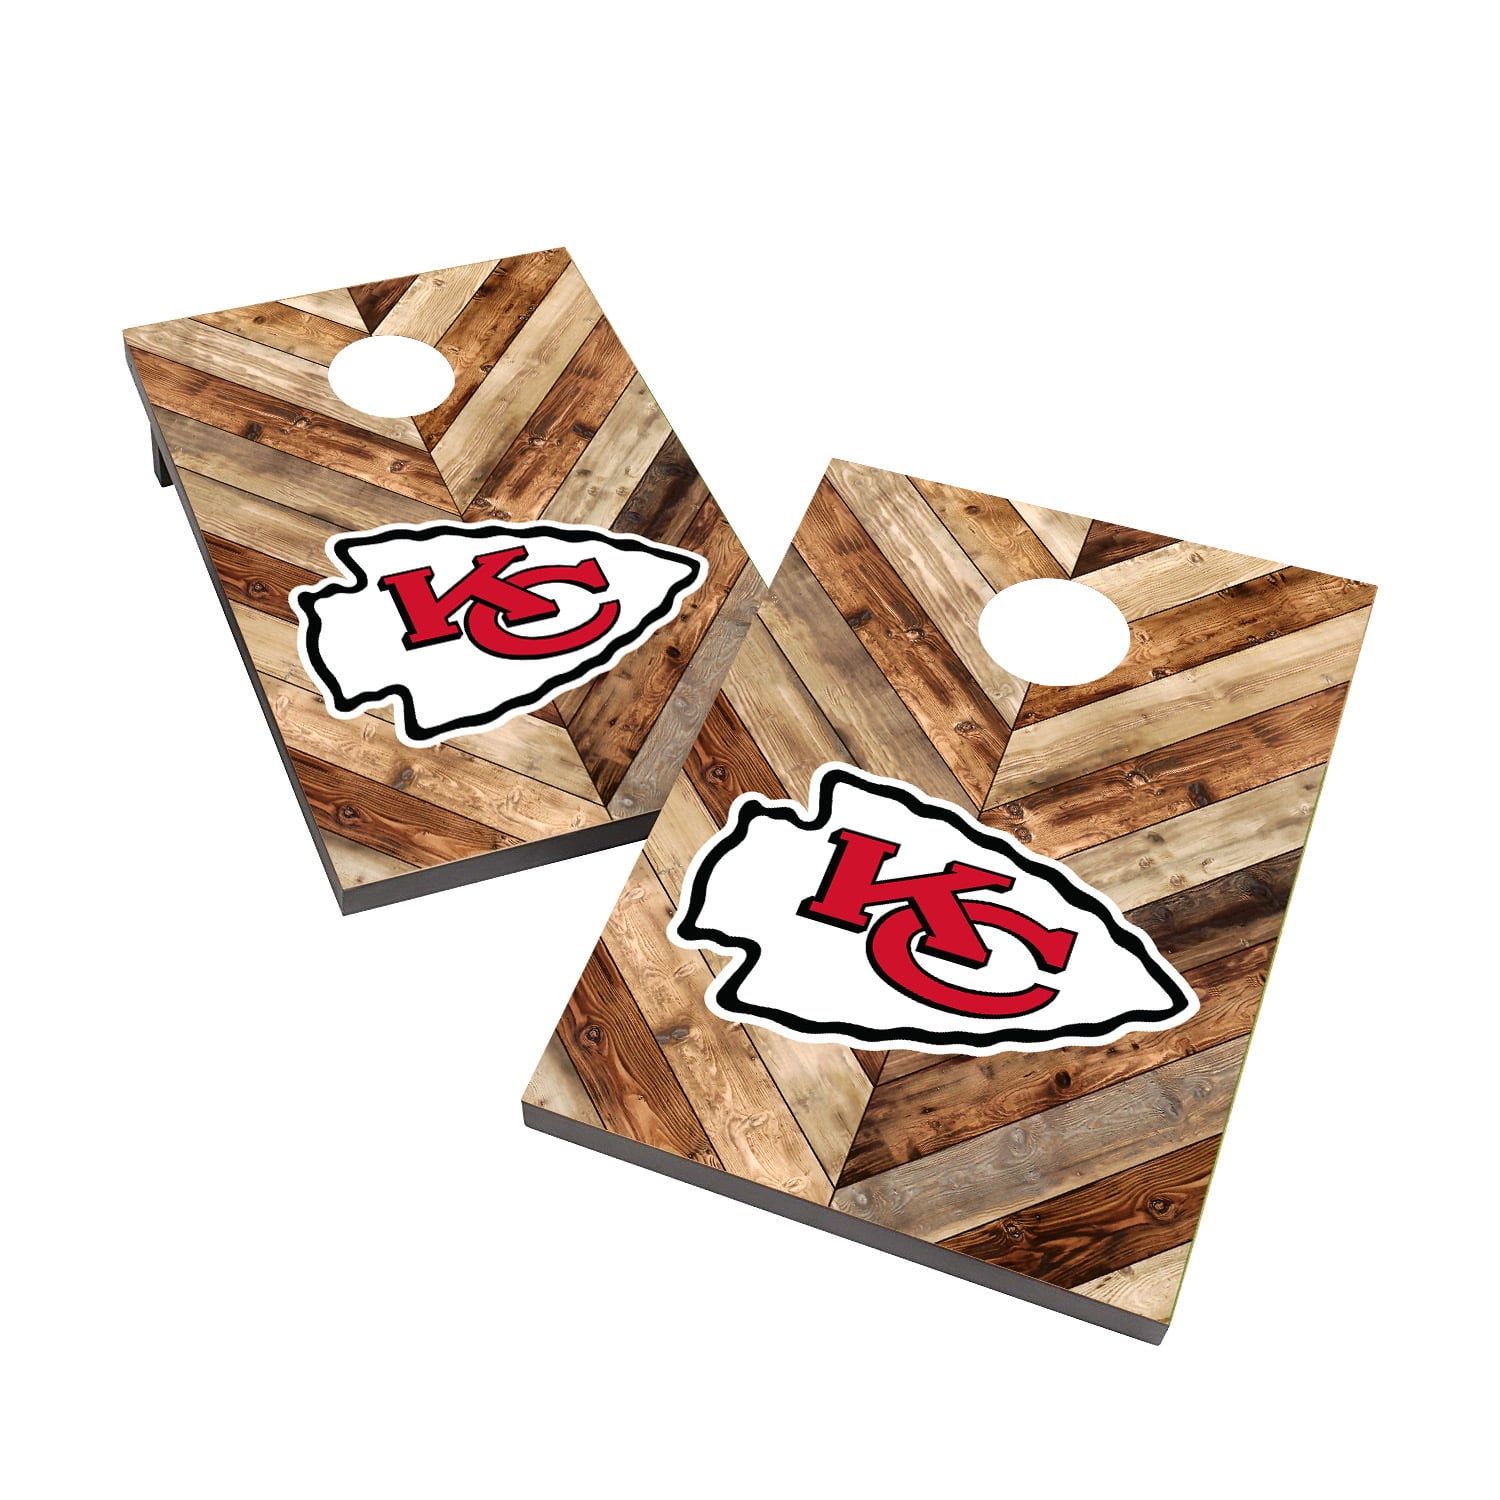 Free shipping Kansas city chiefs decals Made in USA corn hole set of 2 decals 